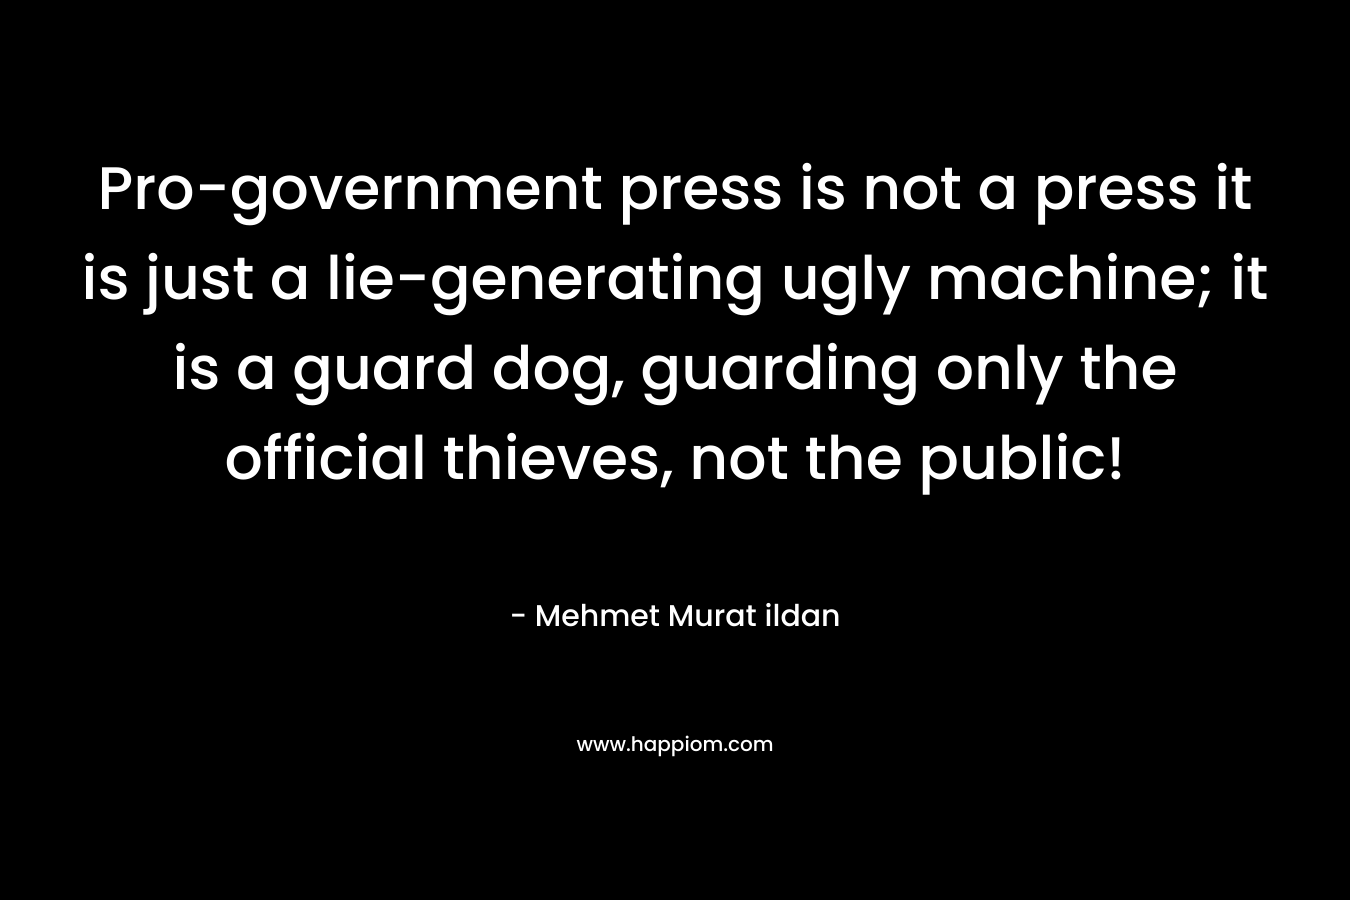 Pro-government press is not a press it is just a lie-generating ugly machine; it is a guard dog, guarding only the official thieves, not the public! – Mehmet Murat ildan